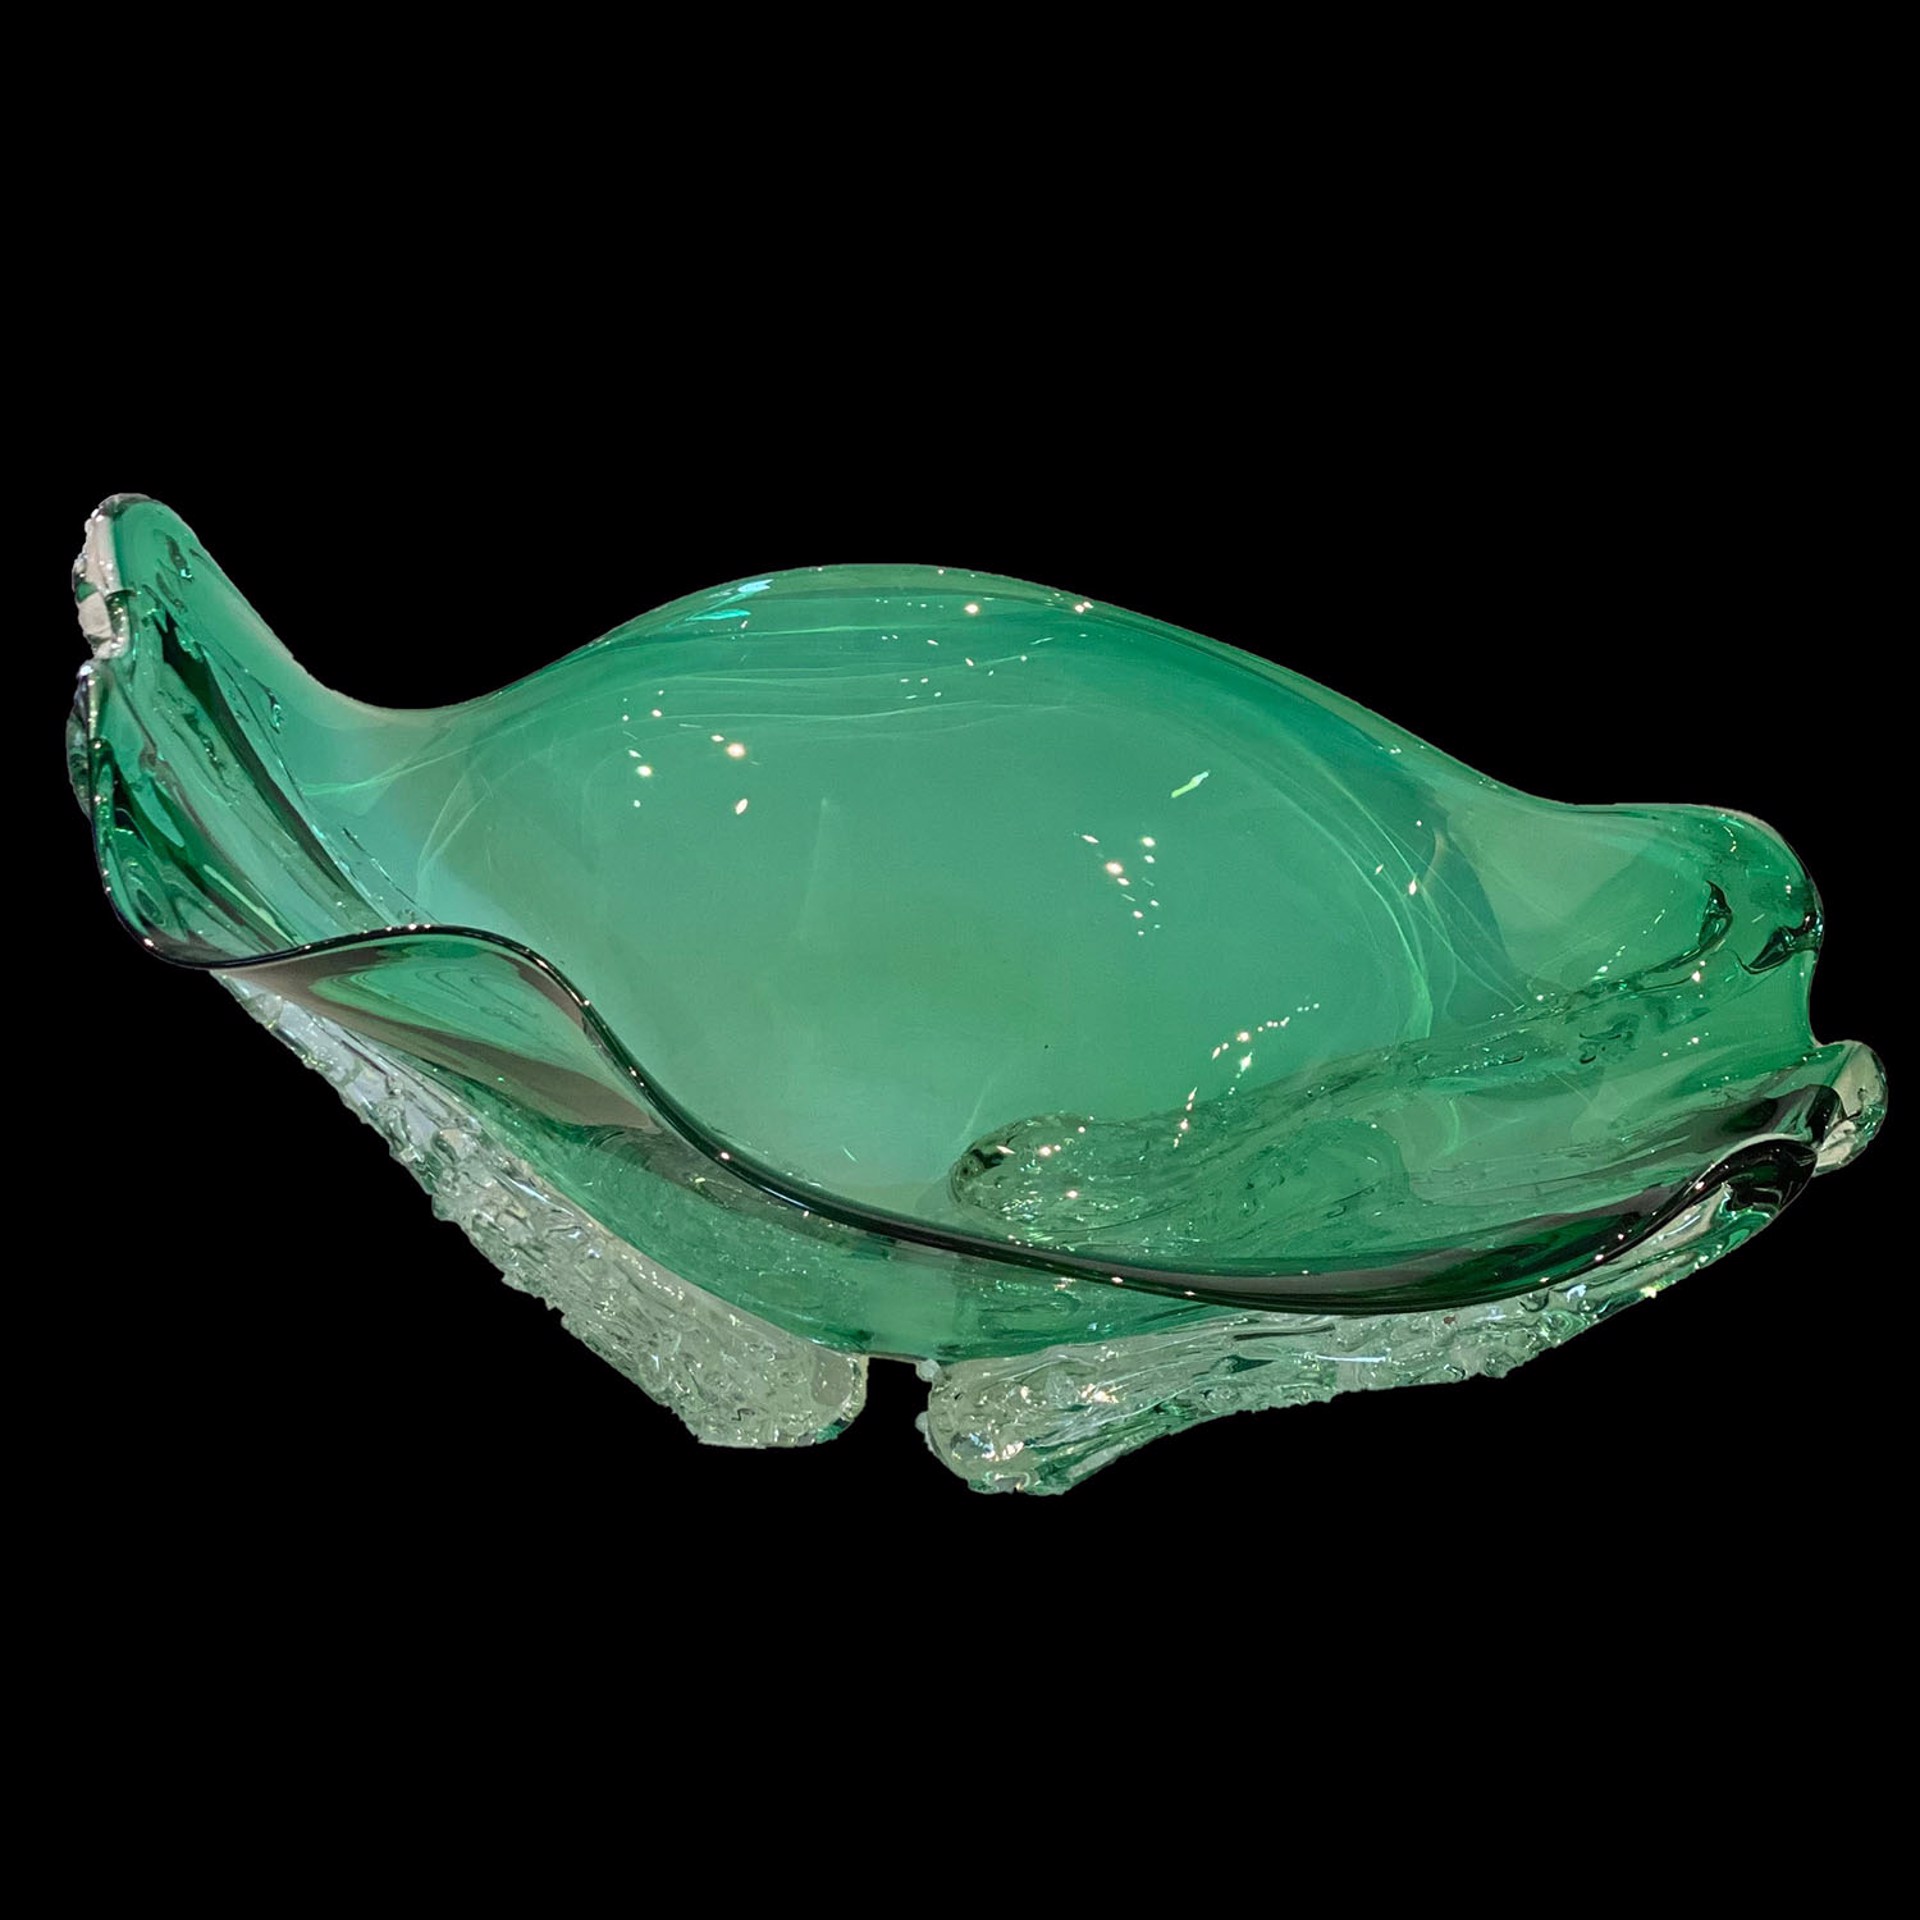 Teal Octo Bowl by Will Dexter